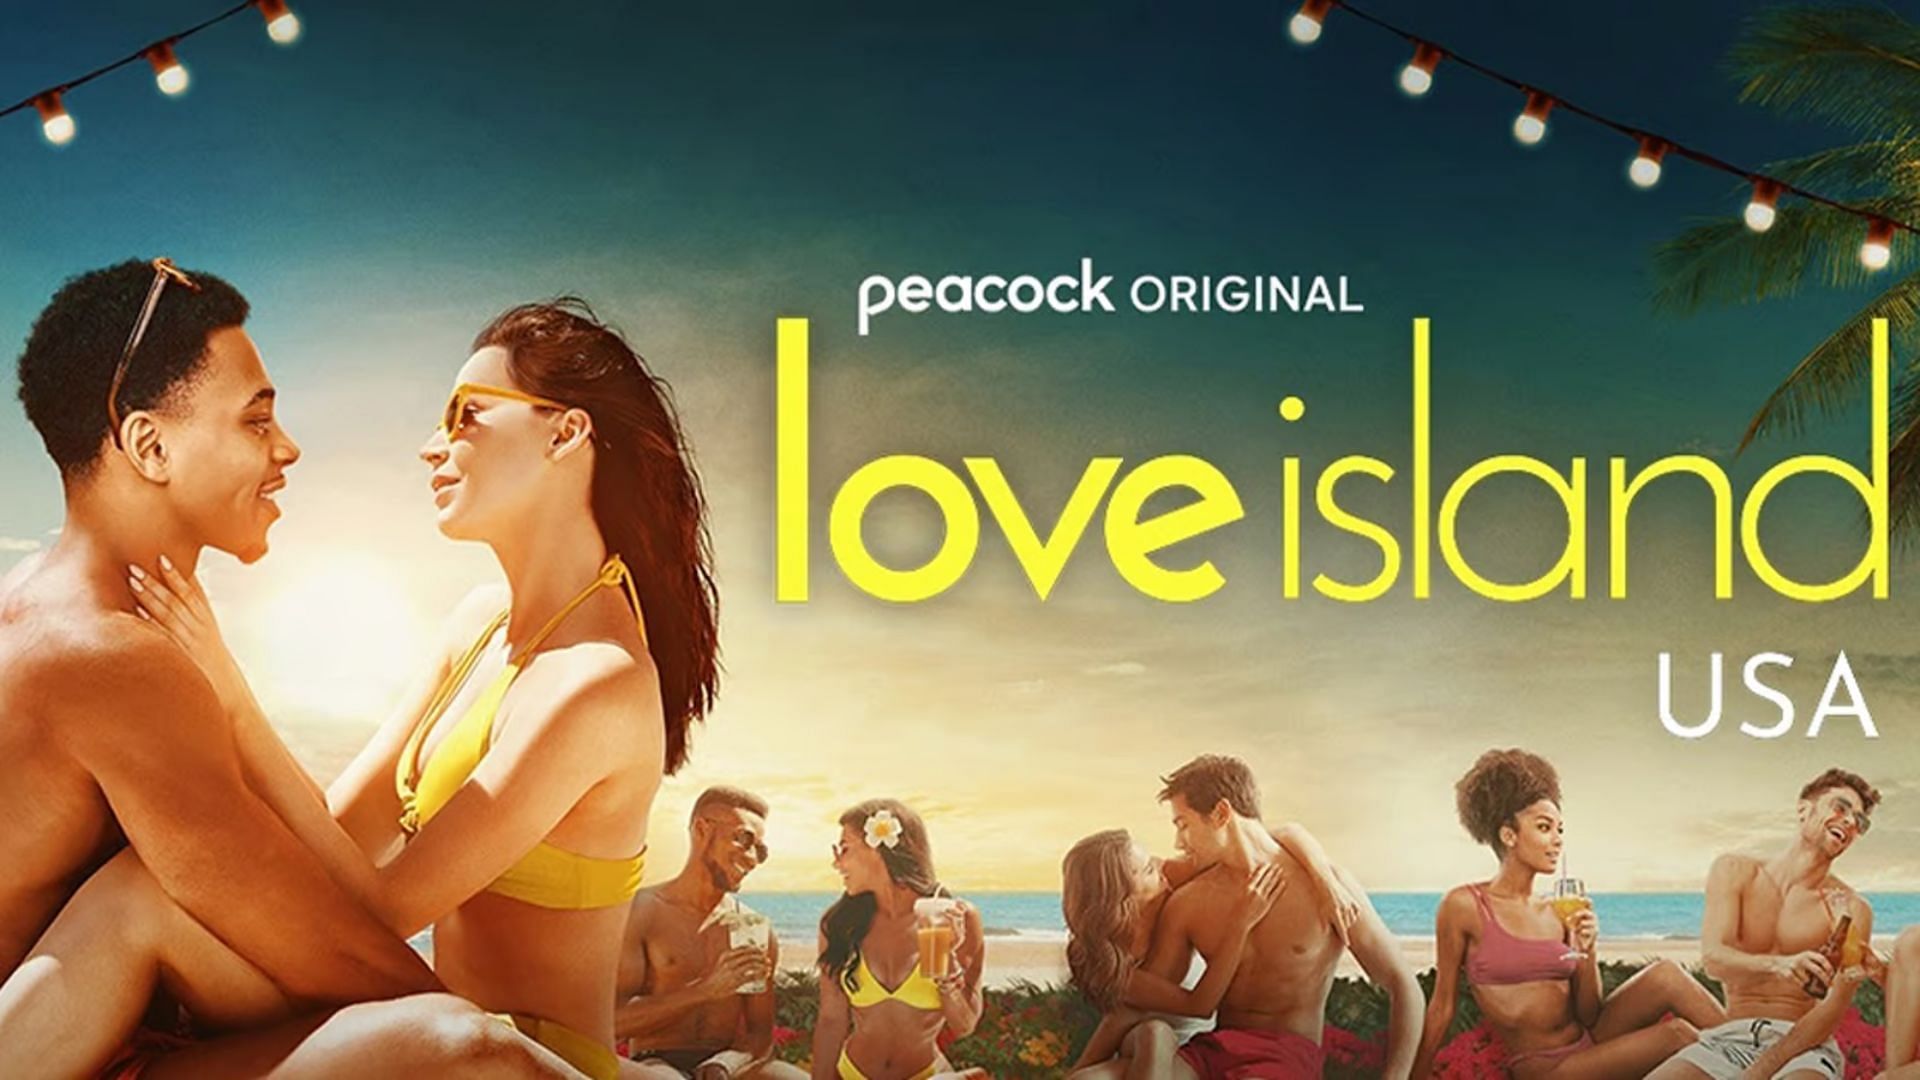 Love Island USA season 5 release date, air time and plot